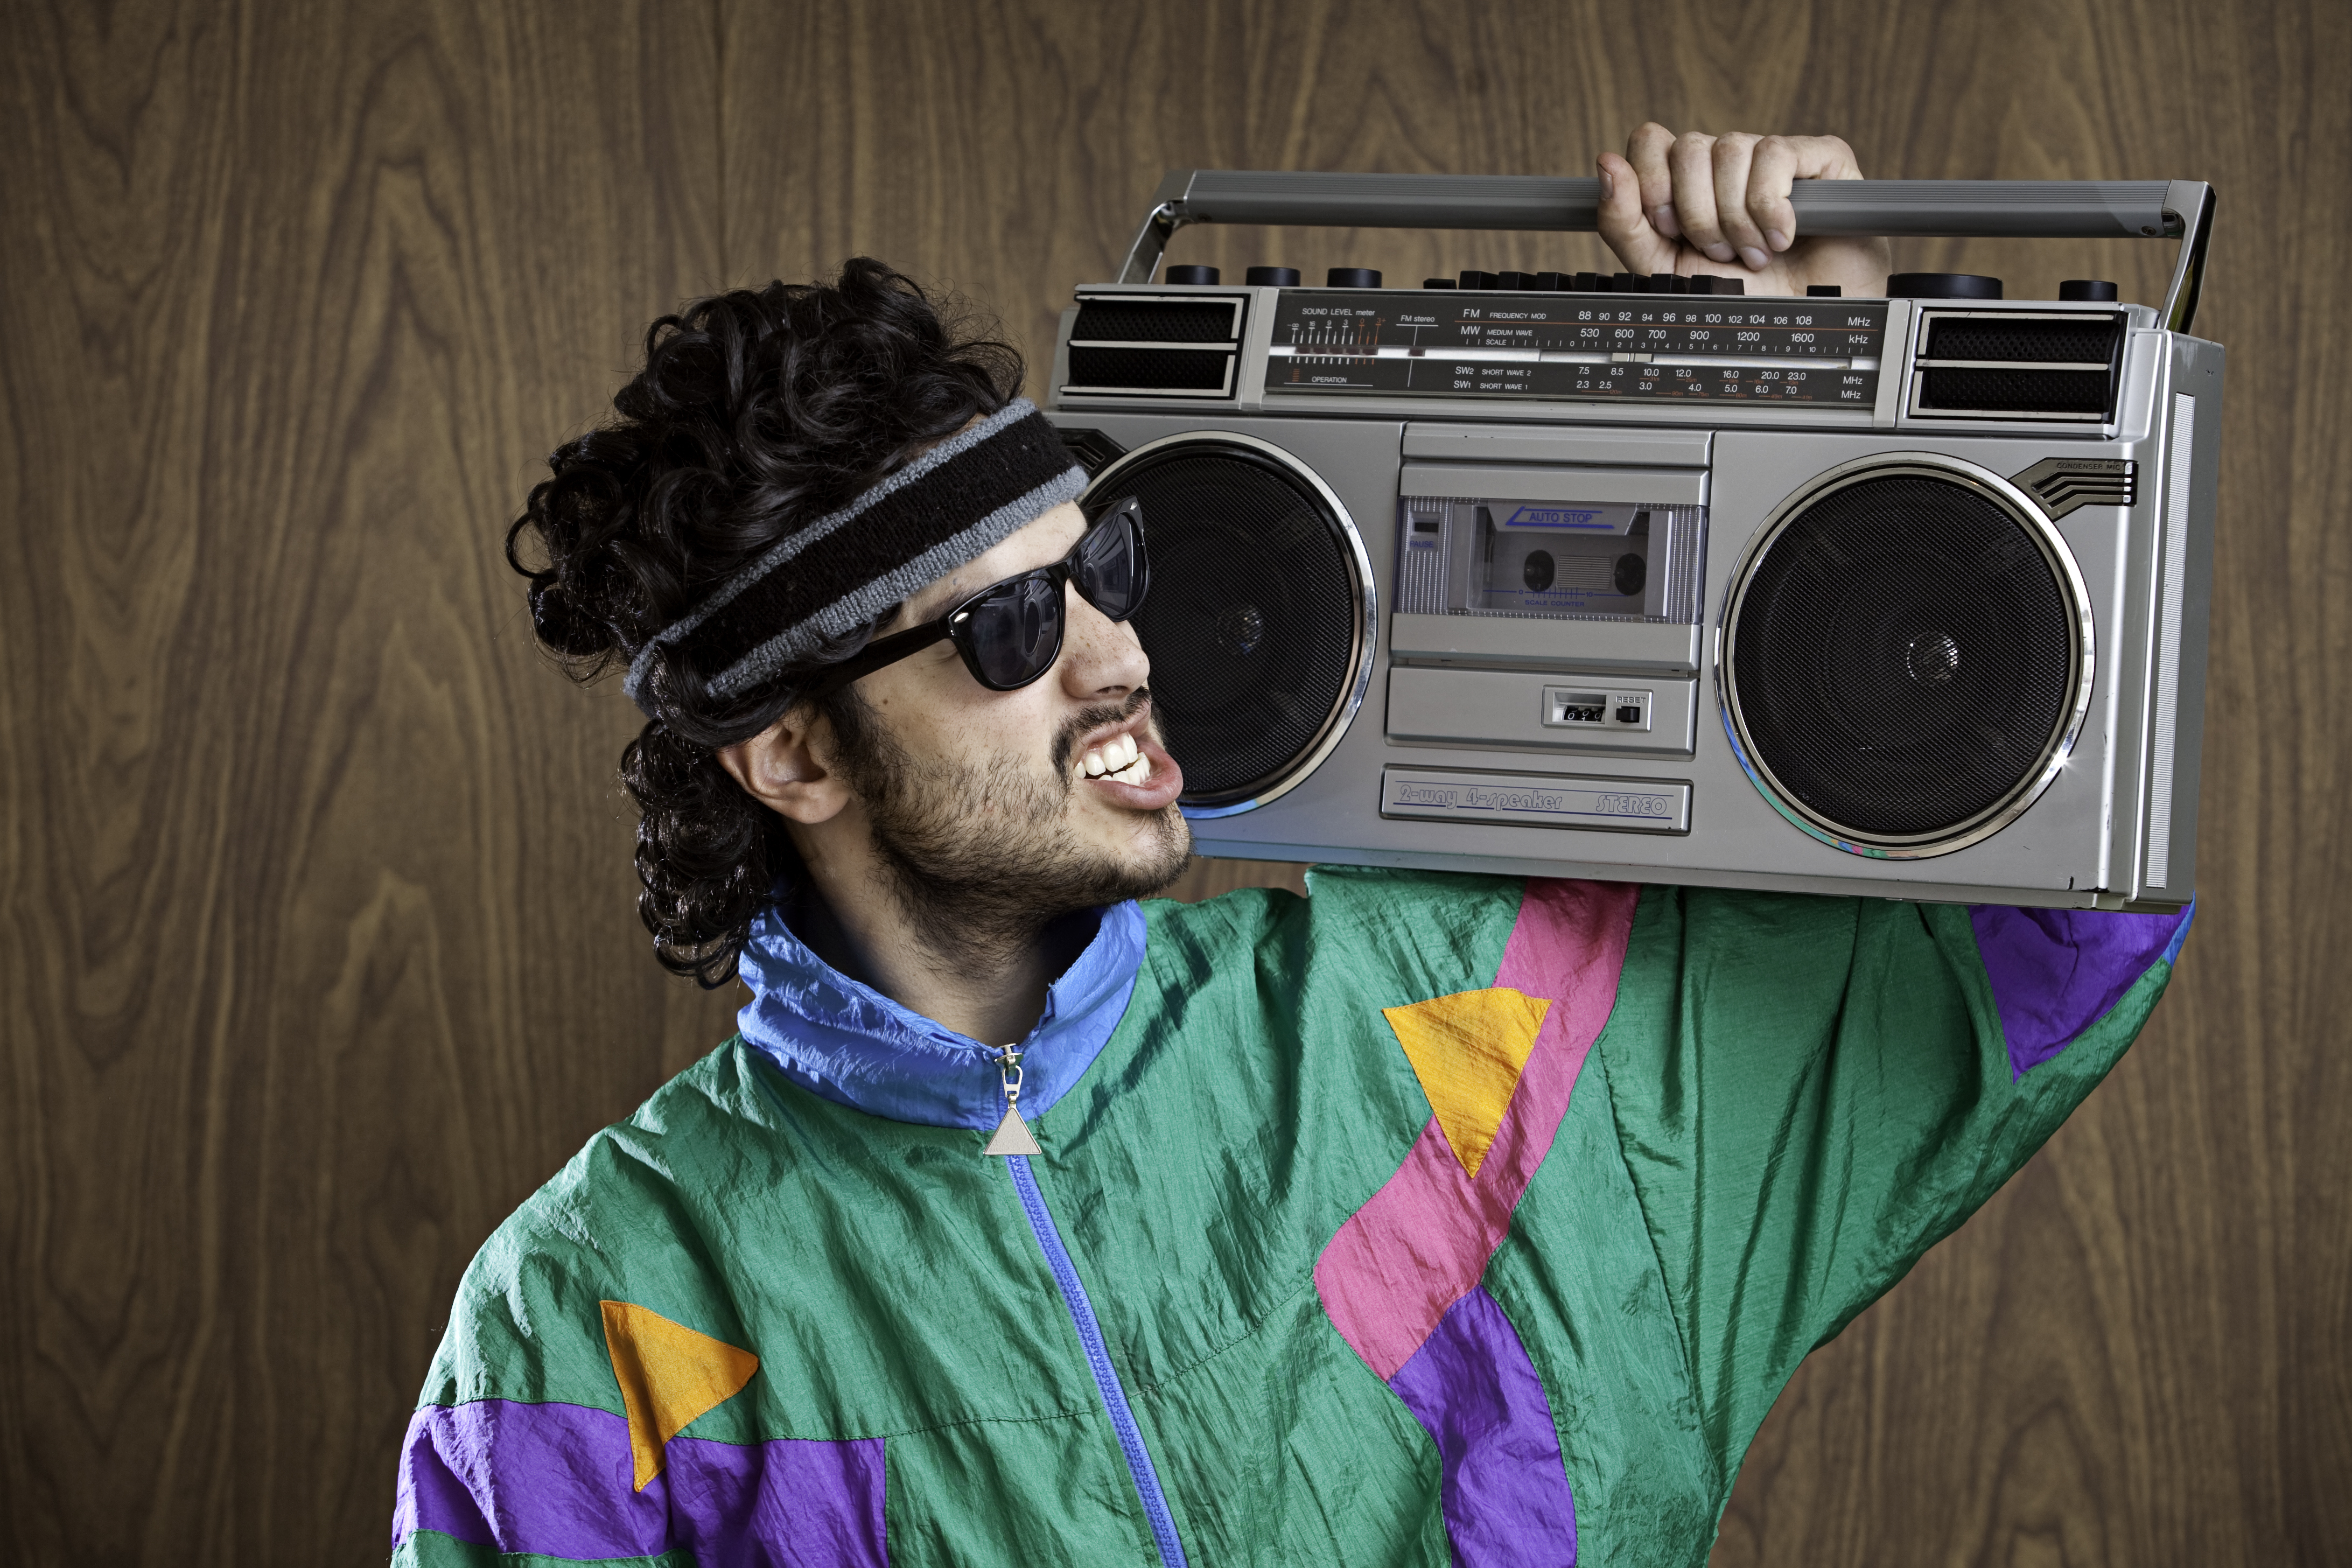 A man in an 80s costume and mullet wig holds a boom box on his shoulder.